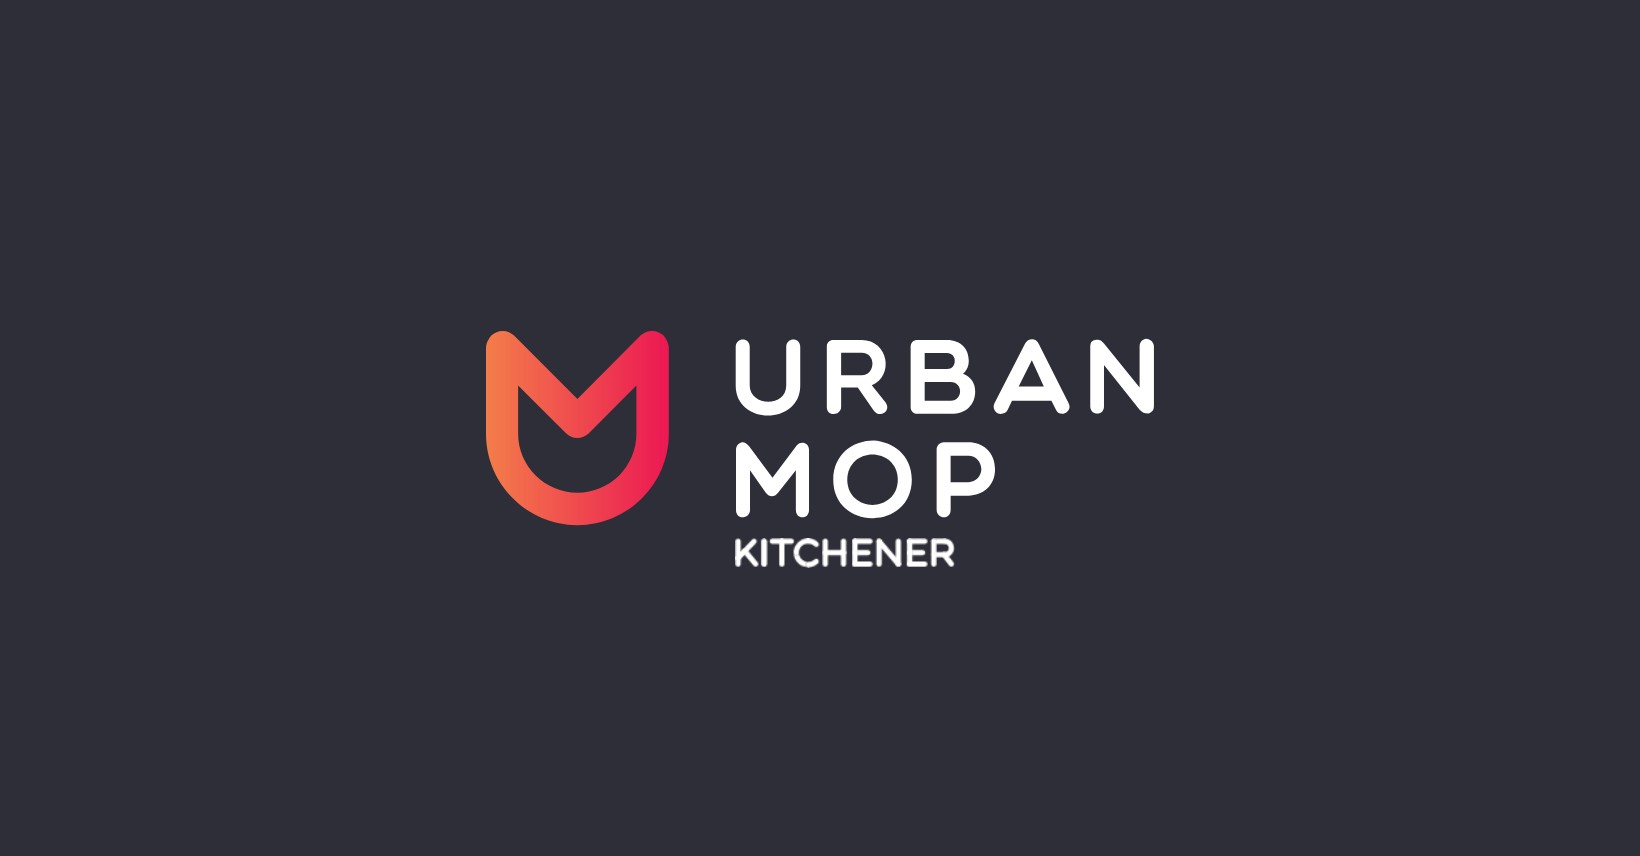 Kitchener Cleaning Services | Home Cleaning | UrbanMop